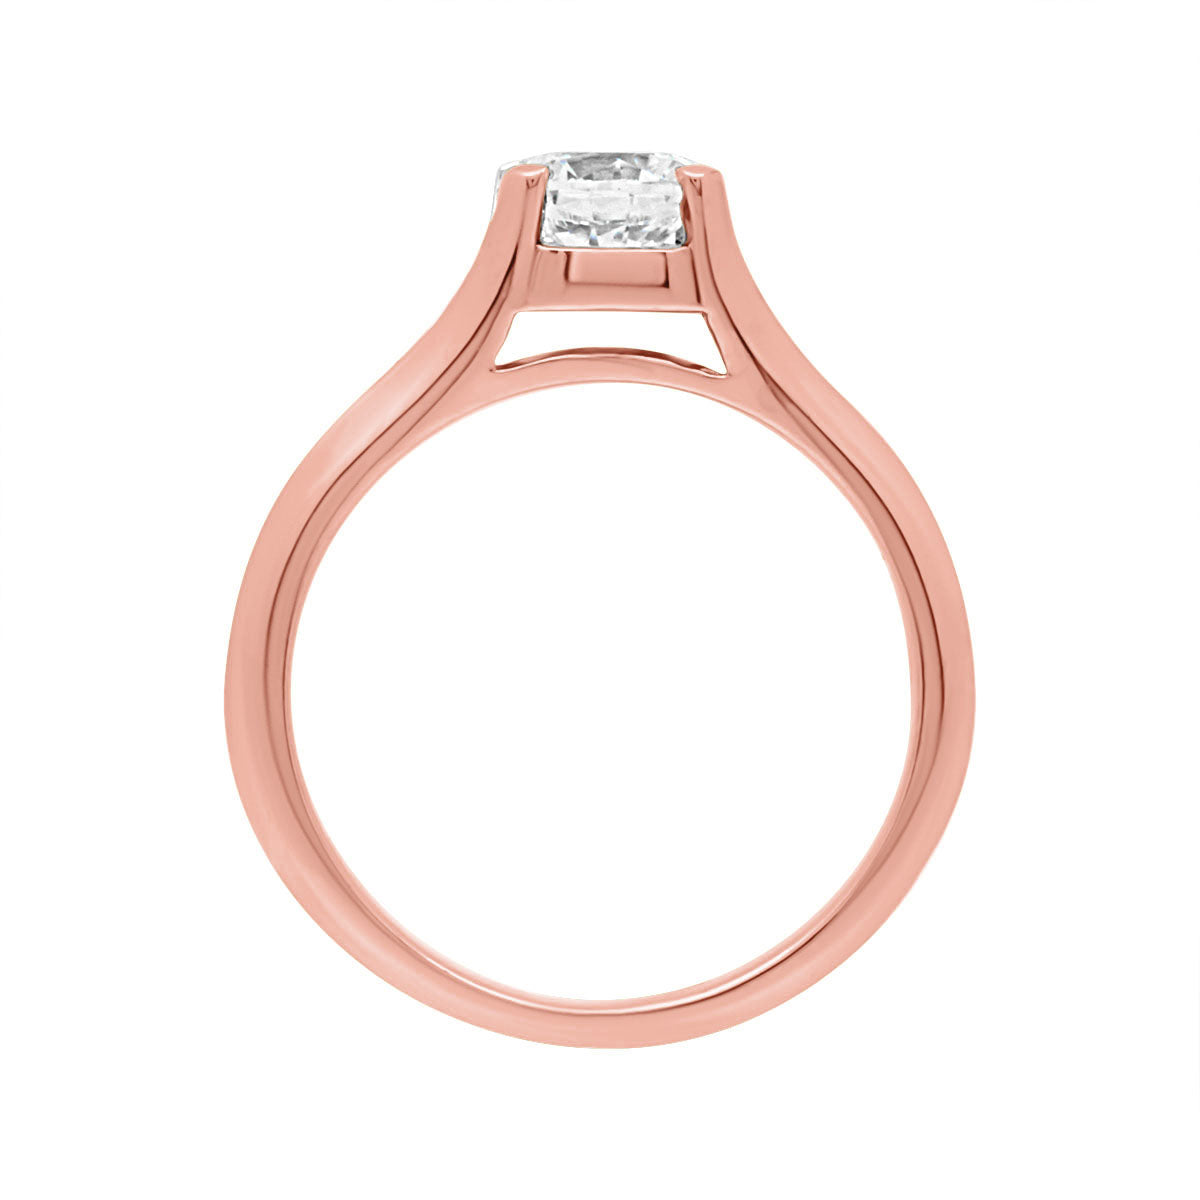 Split Knife Edge Band Ring in rose gold in an upright positon